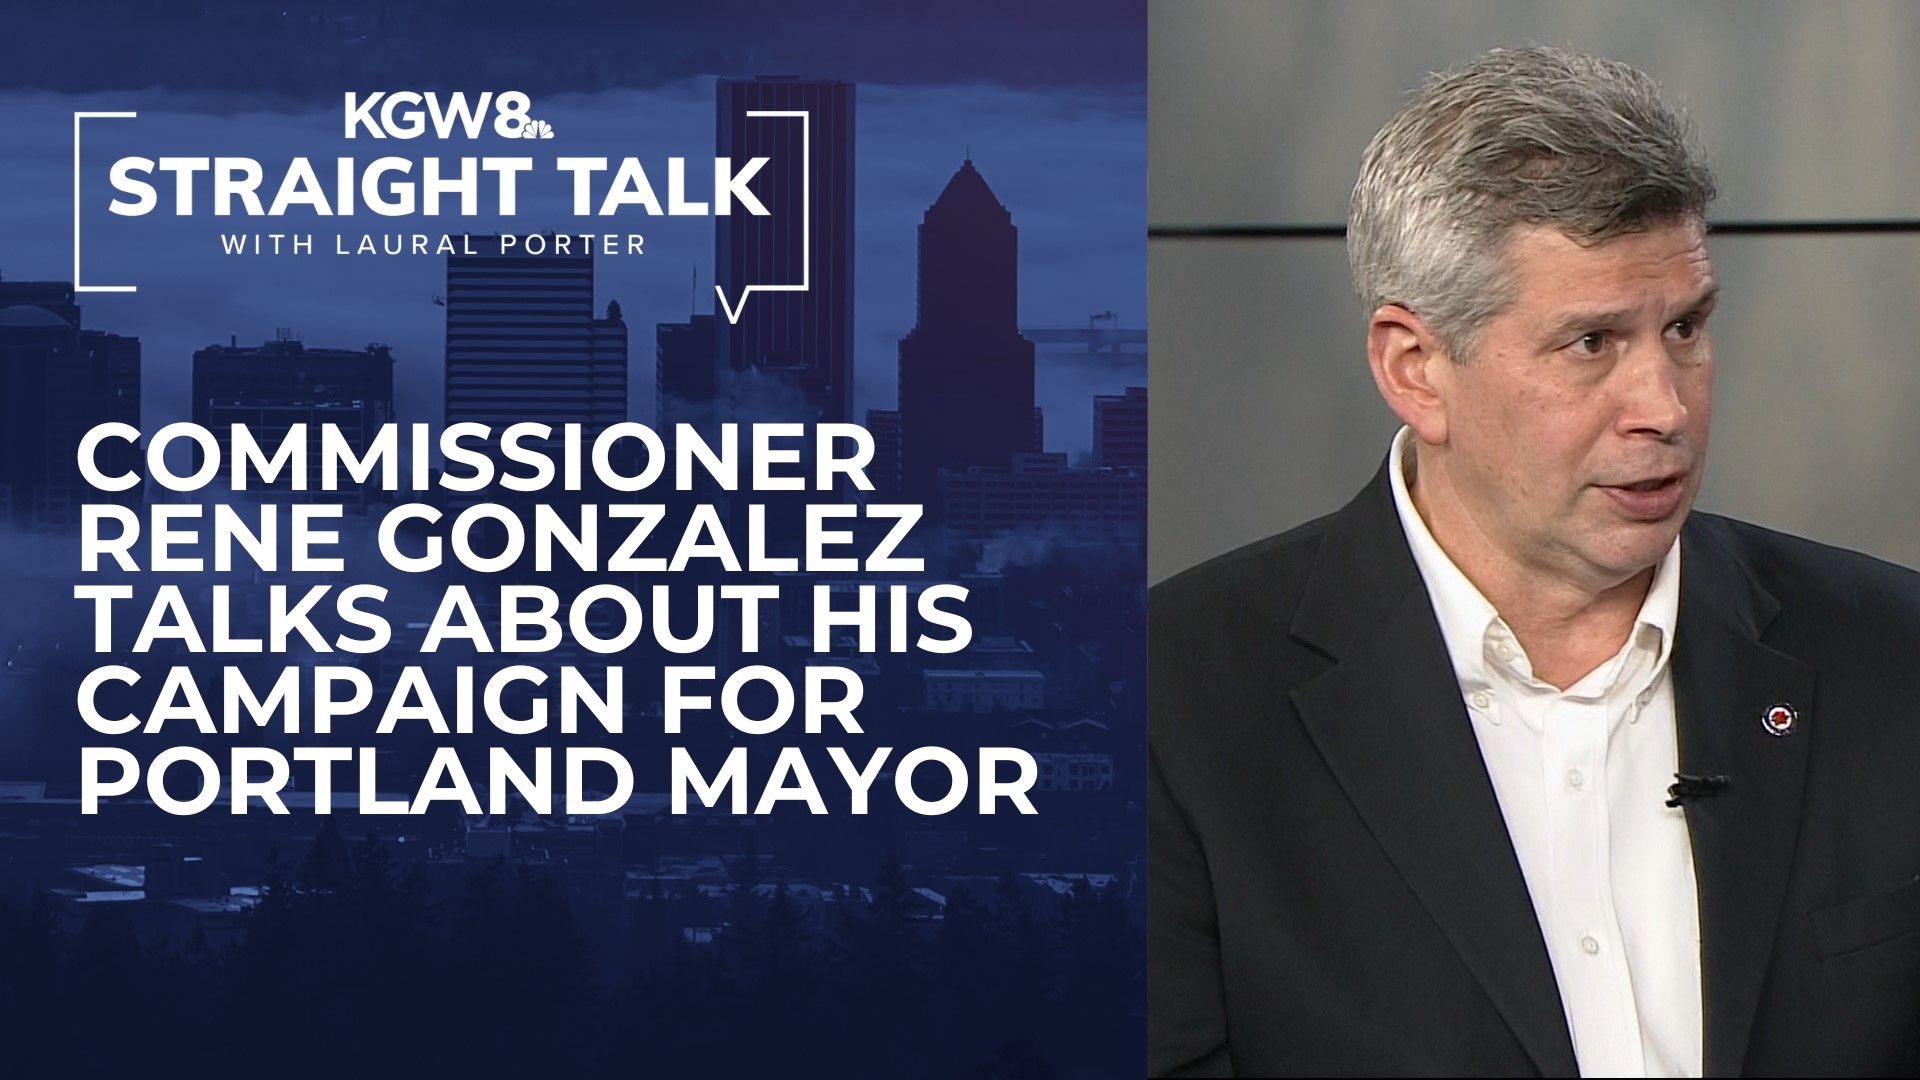 Gonzalez is one of three current city commissioners who have launched bids to become the first mayor under Portland's new system of government in 2025.